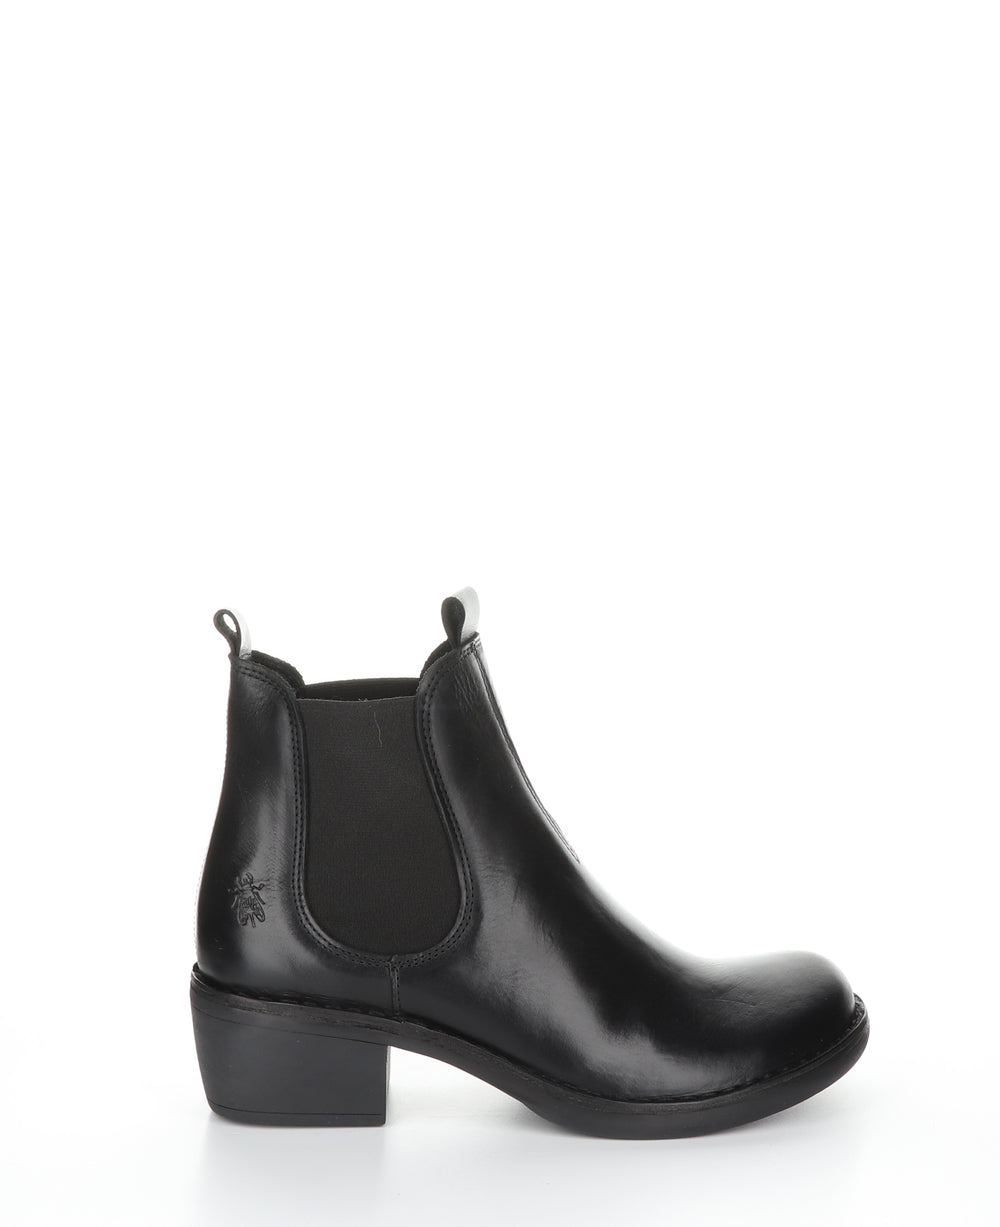 MEME030FLY Black Round Toe Ankle Boots|MEME030FLY Bottines à Bout Rond in Noir